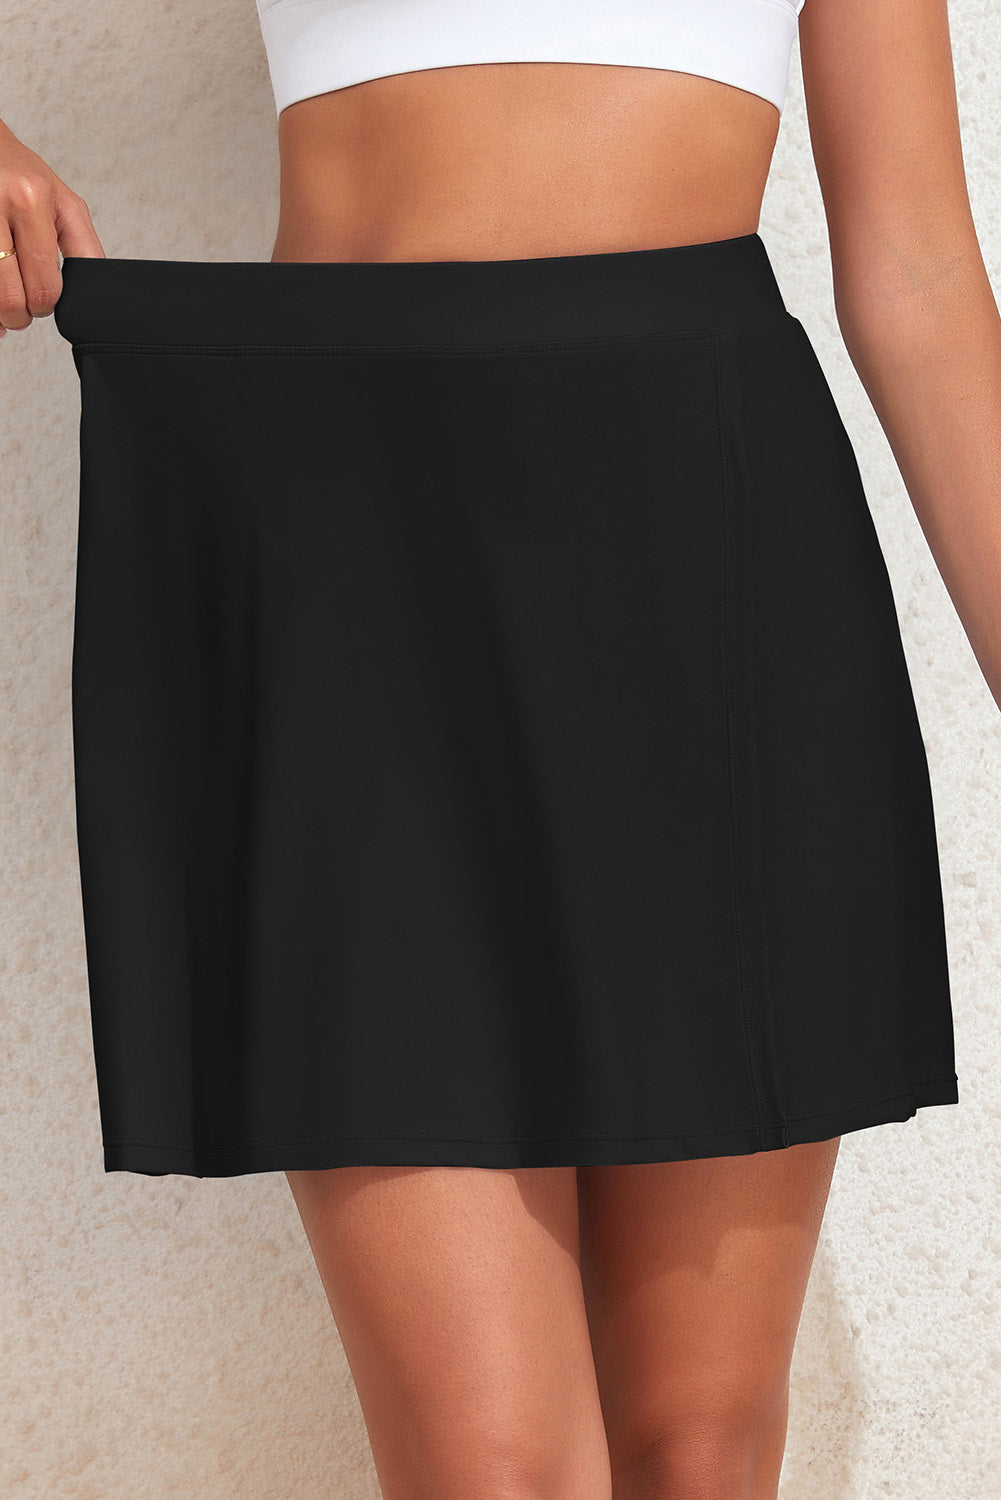 Versatile Slit Swim Skort with pockets - ideal for stylish comfort during beach activities & water sports. Perfect summer wear for active women.